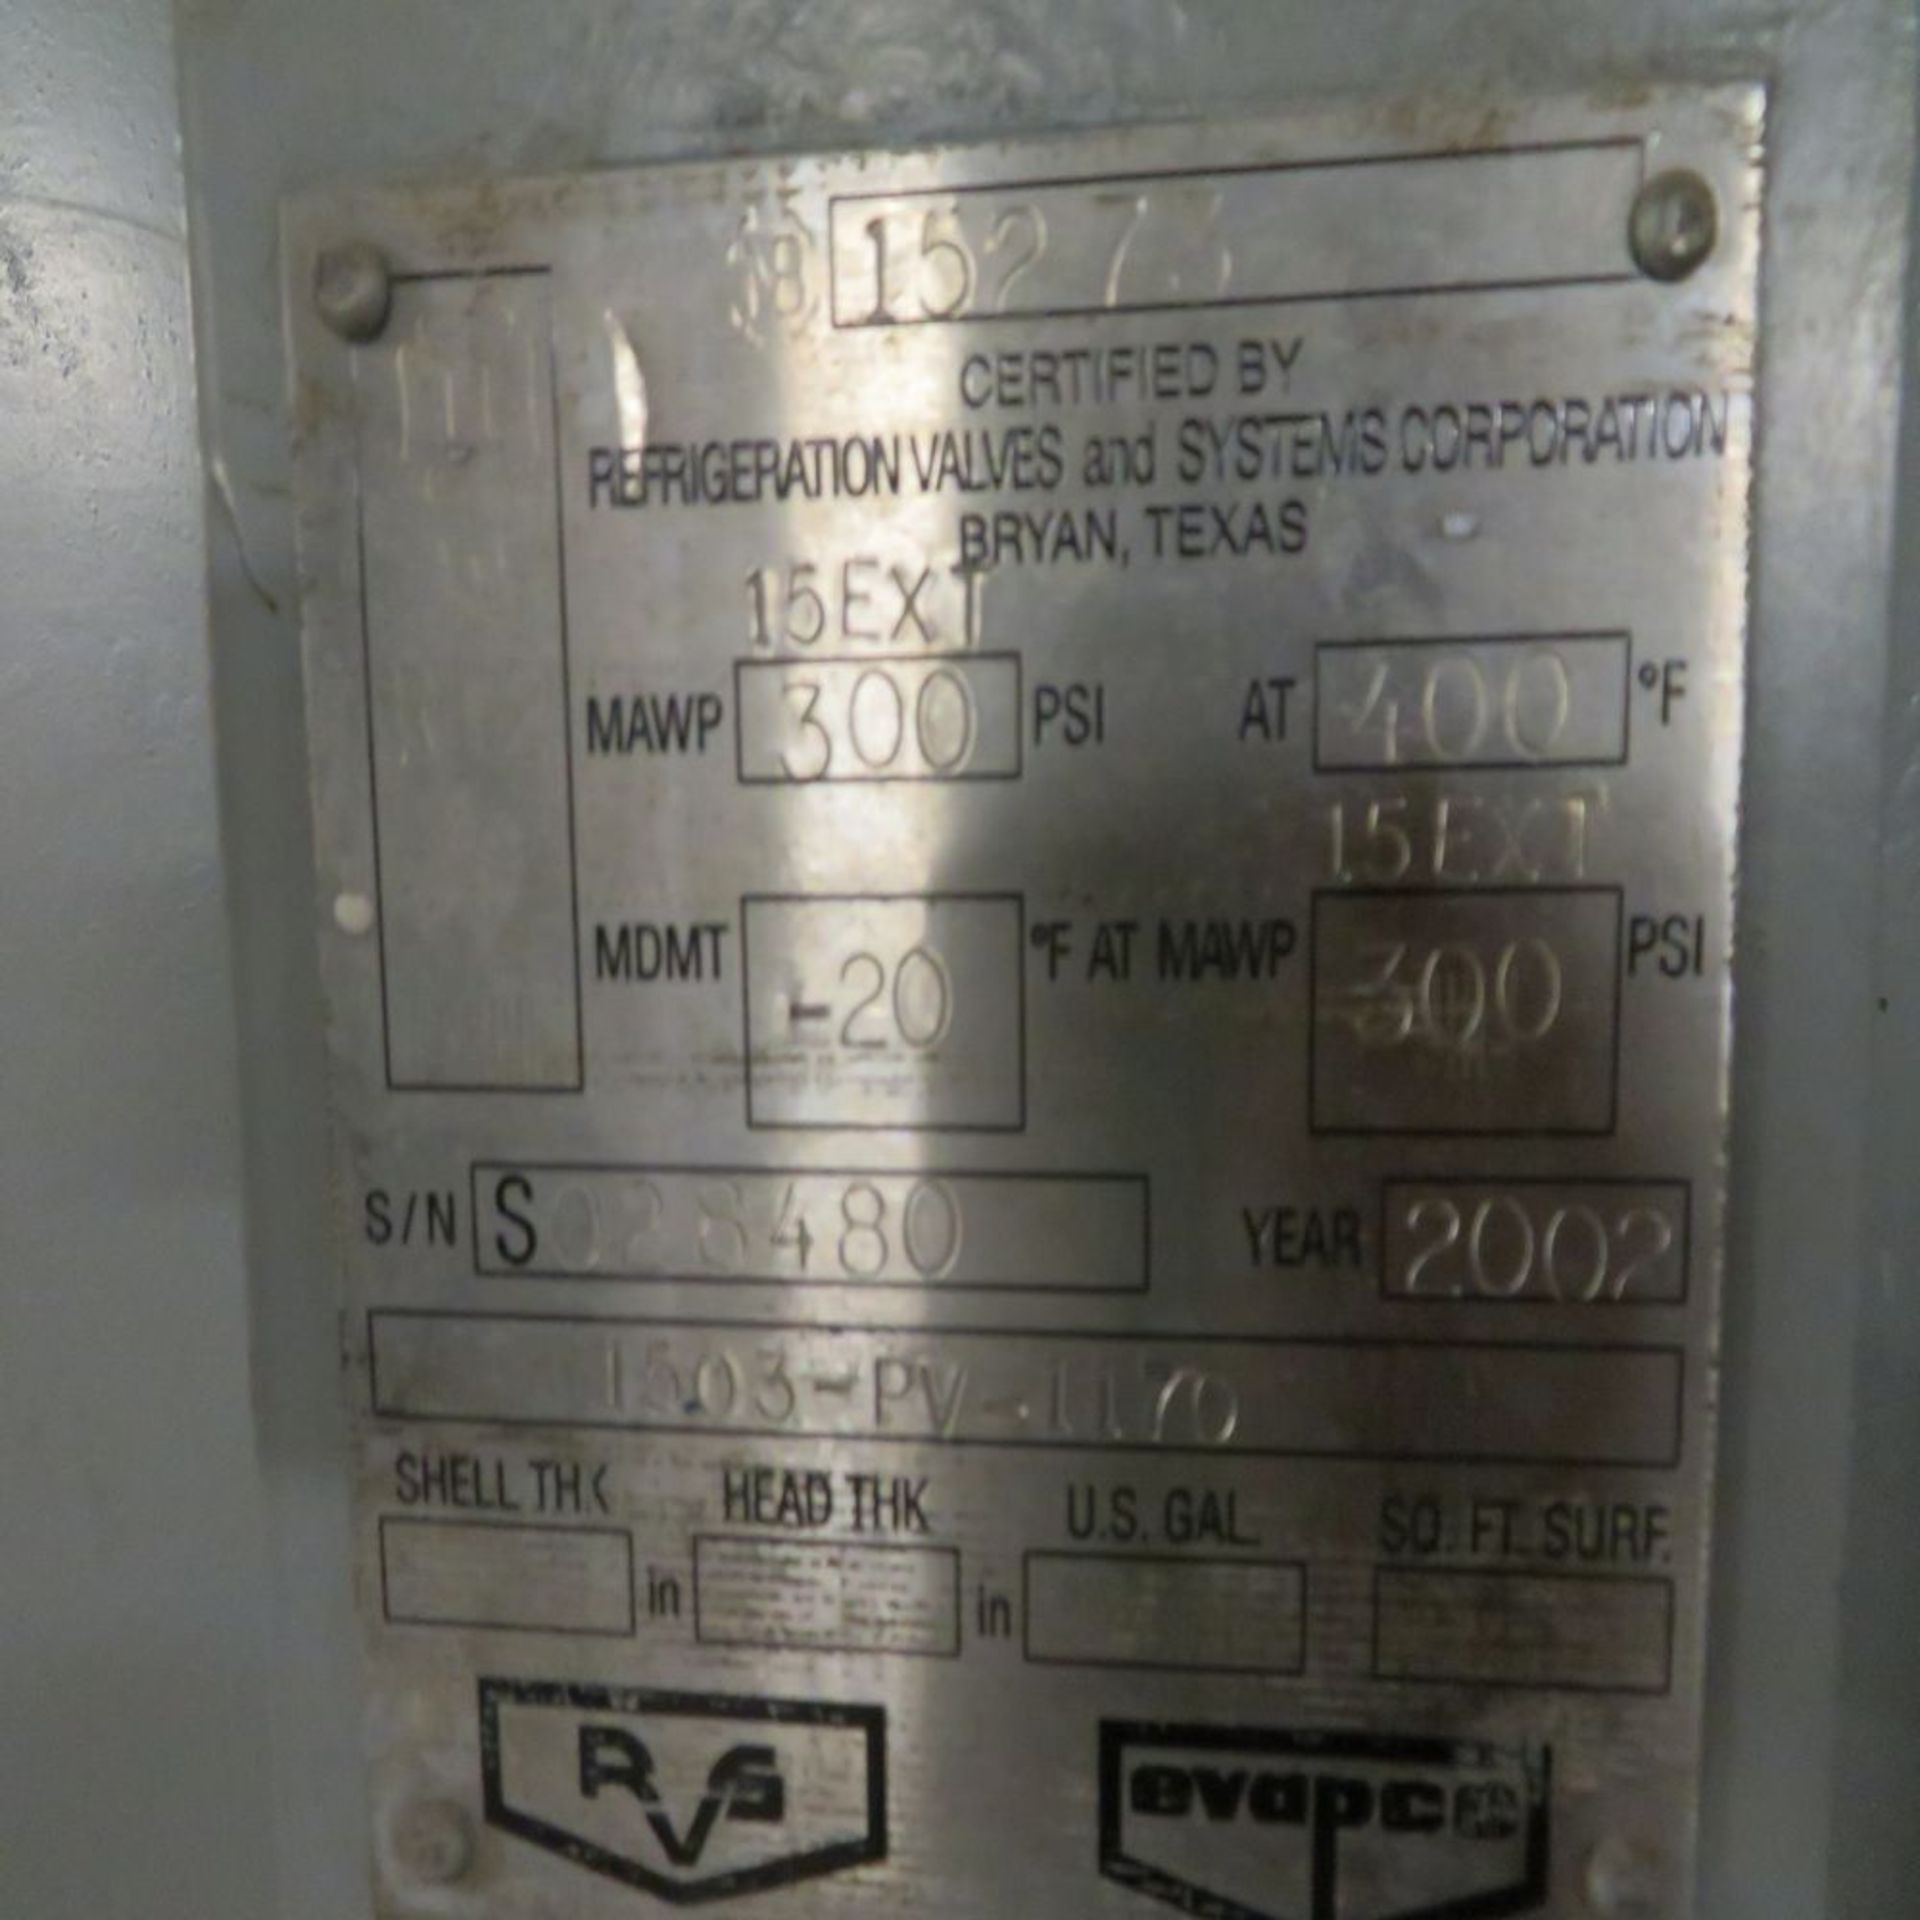 (2002) High Pressure Receiver, 1159 Cu. Ft. S/N SD28480 (No Pipe/Wire) Located on Third Floor - Image 2 of 3